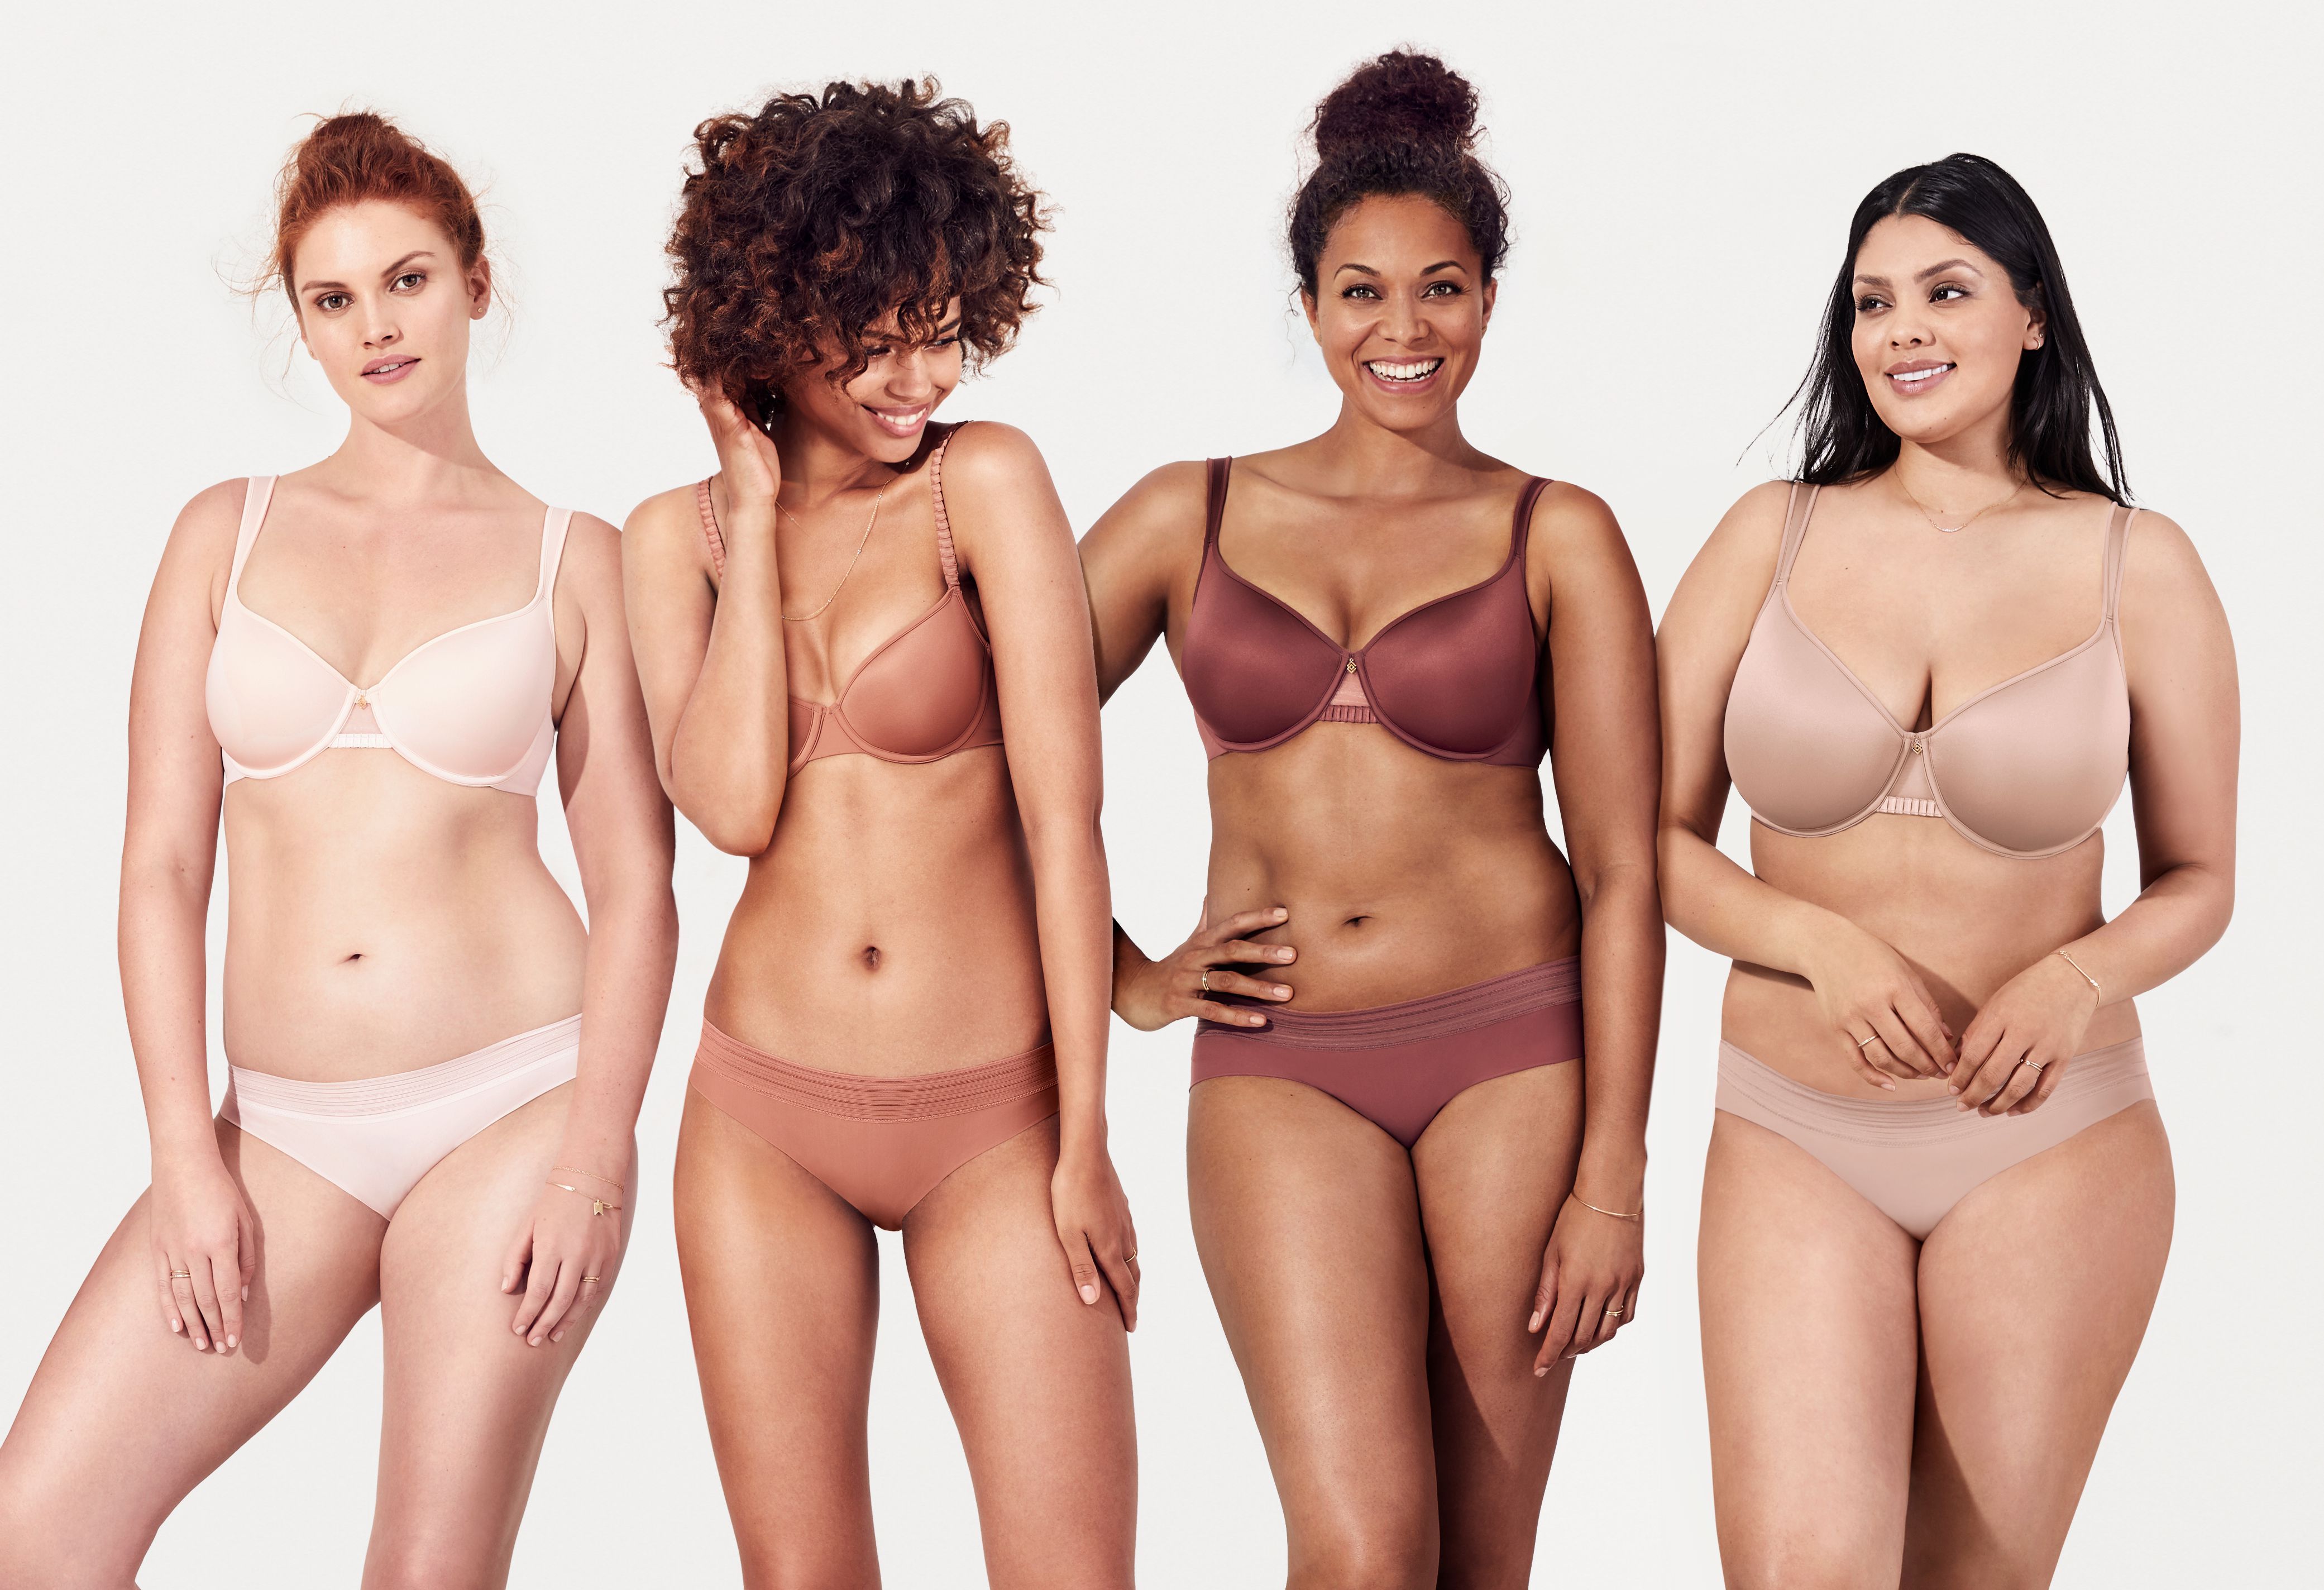 ThirdLove, the direct-to-consumer lingerie startup, gets a $55M boost